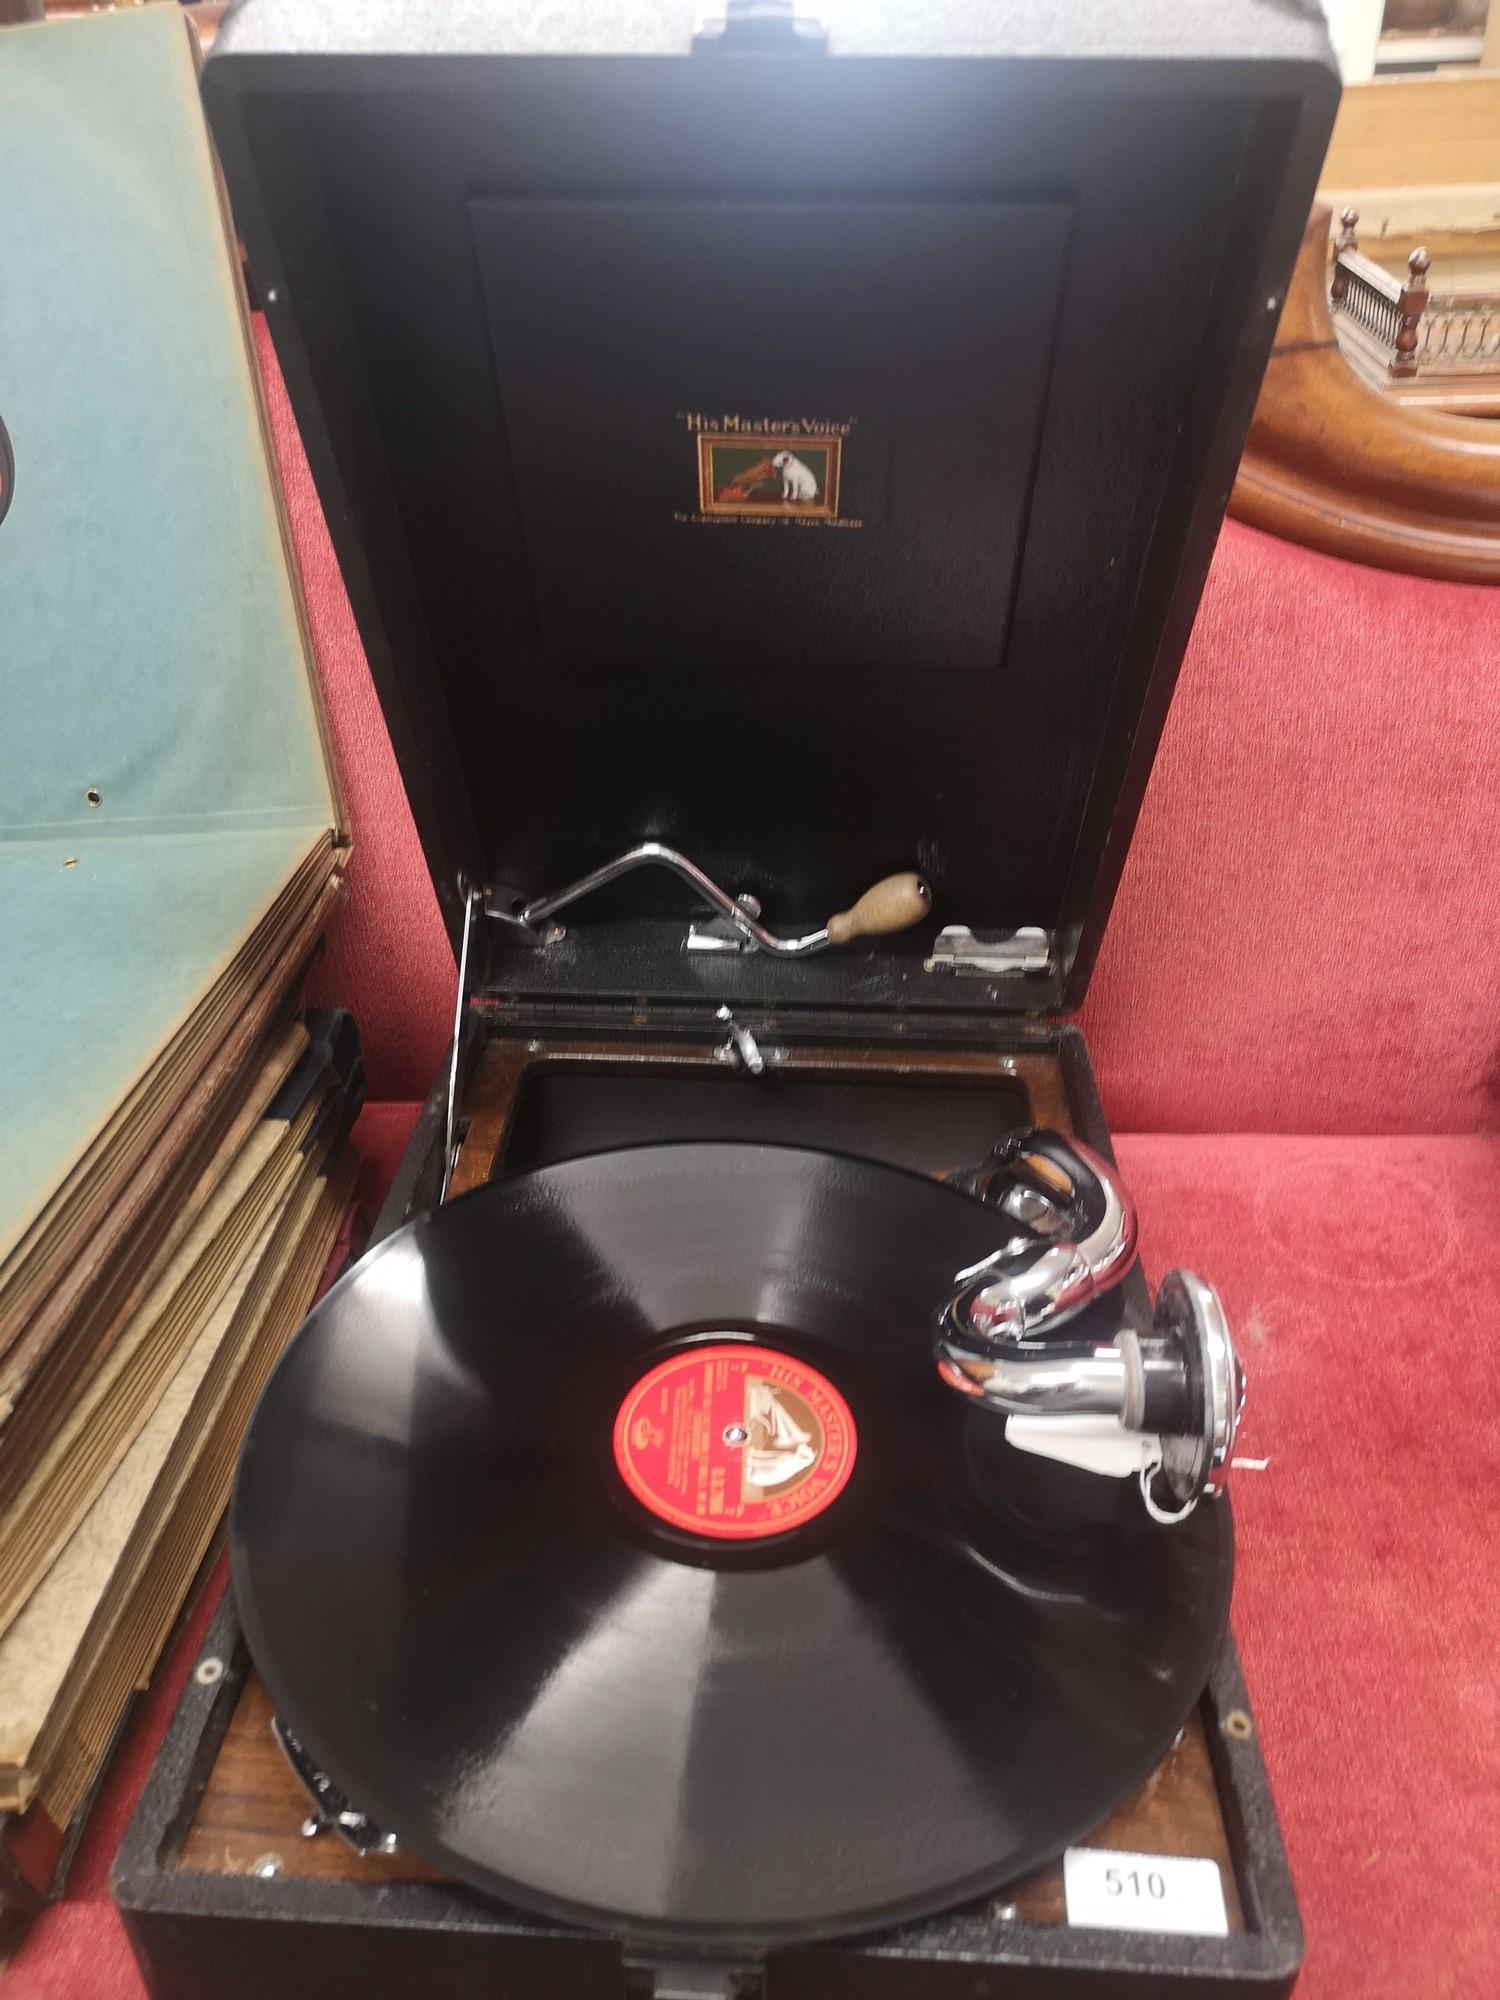 His masters voice gramaphone together with selection of gramaphone records. - Image 2 of 7